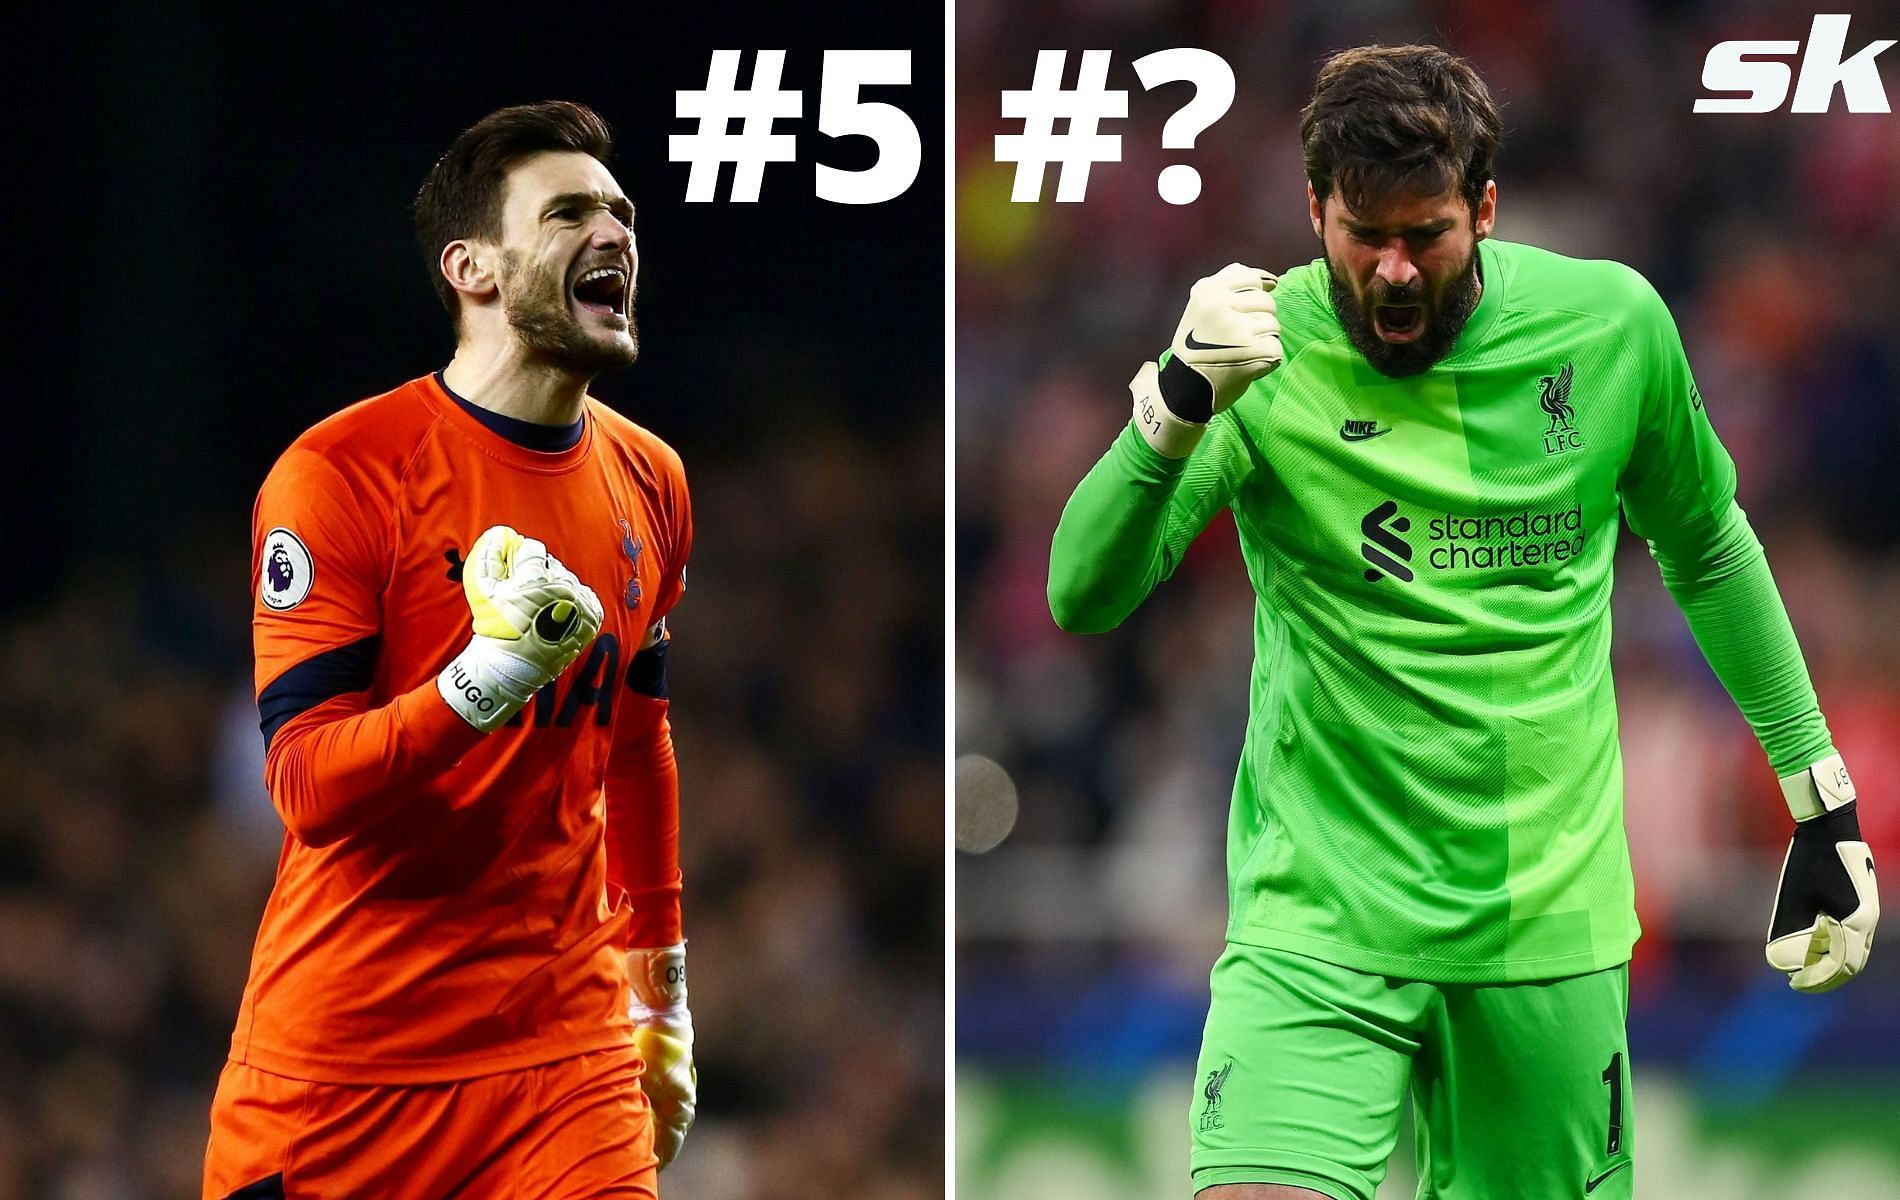 Who is the goalkeeper with the best distribution in the Premier League?